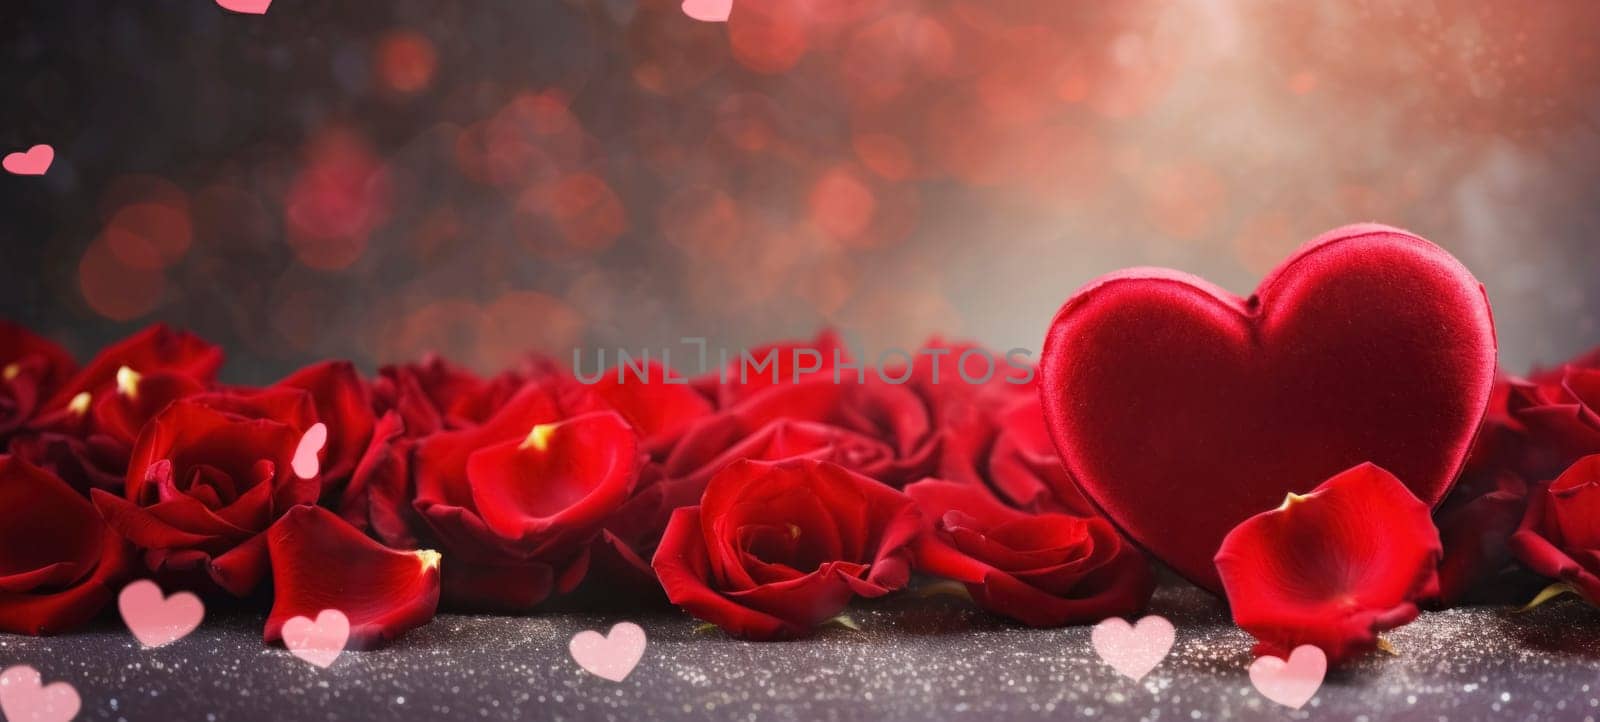 Background with roses and hearts for Valentine's Day. Horizontal banner by andreyz